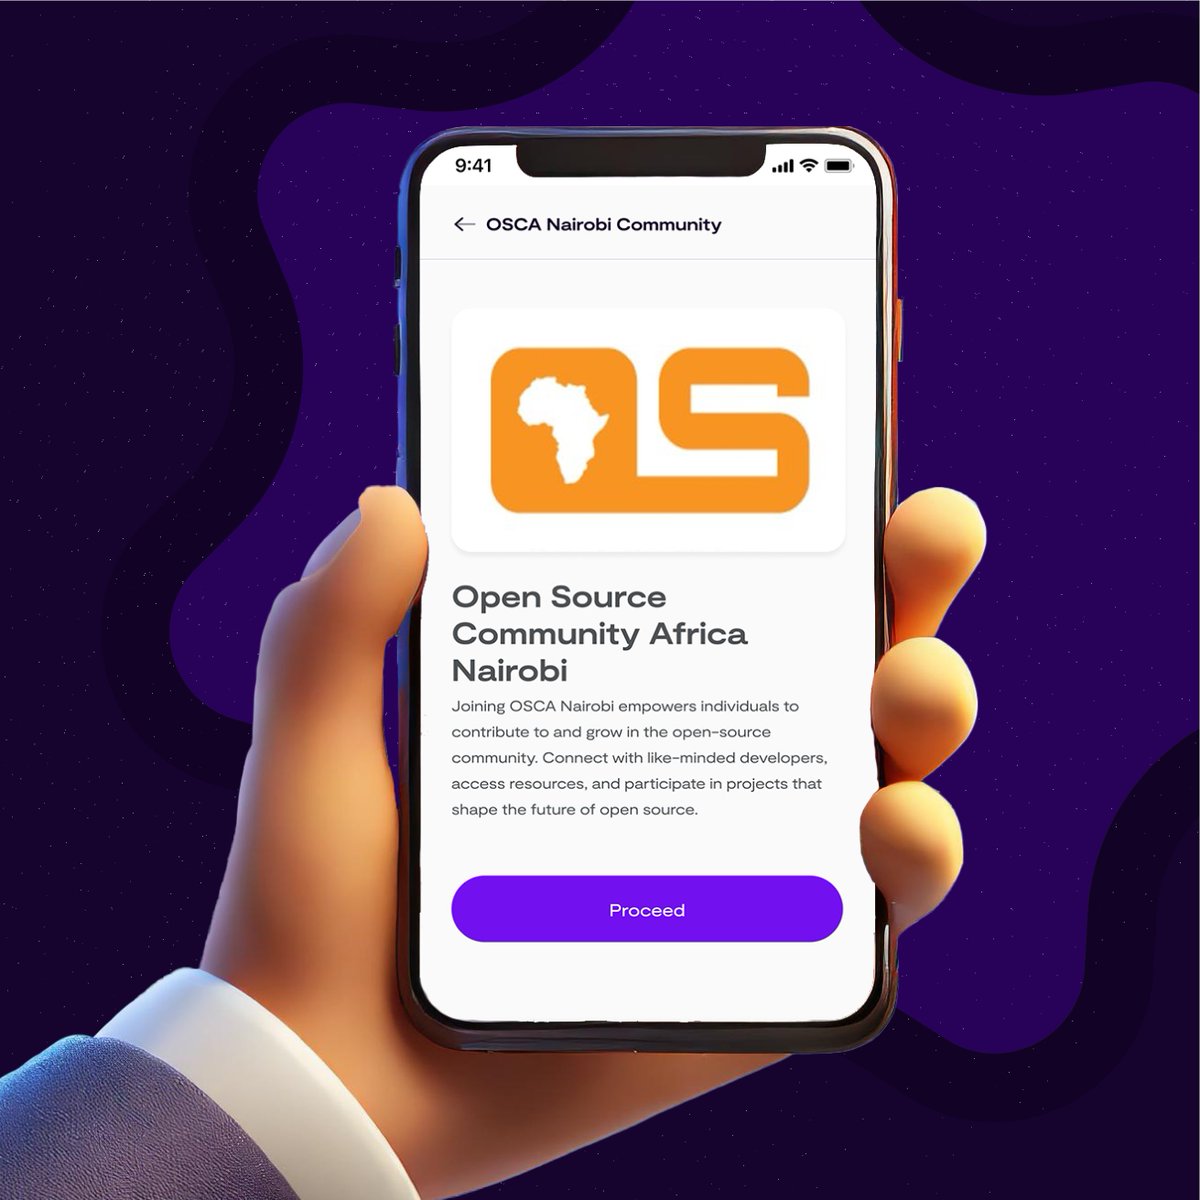 Exciting News!🎉 @oscanairobi is now listed on the Chimoney App! This means that OSCA Nairobi members can now enjoy exclusive access to multi-currency wallets and cross-border payments allowing them to send and receive payments seamlessly. Learn more: bit.ly/3WCVv2e